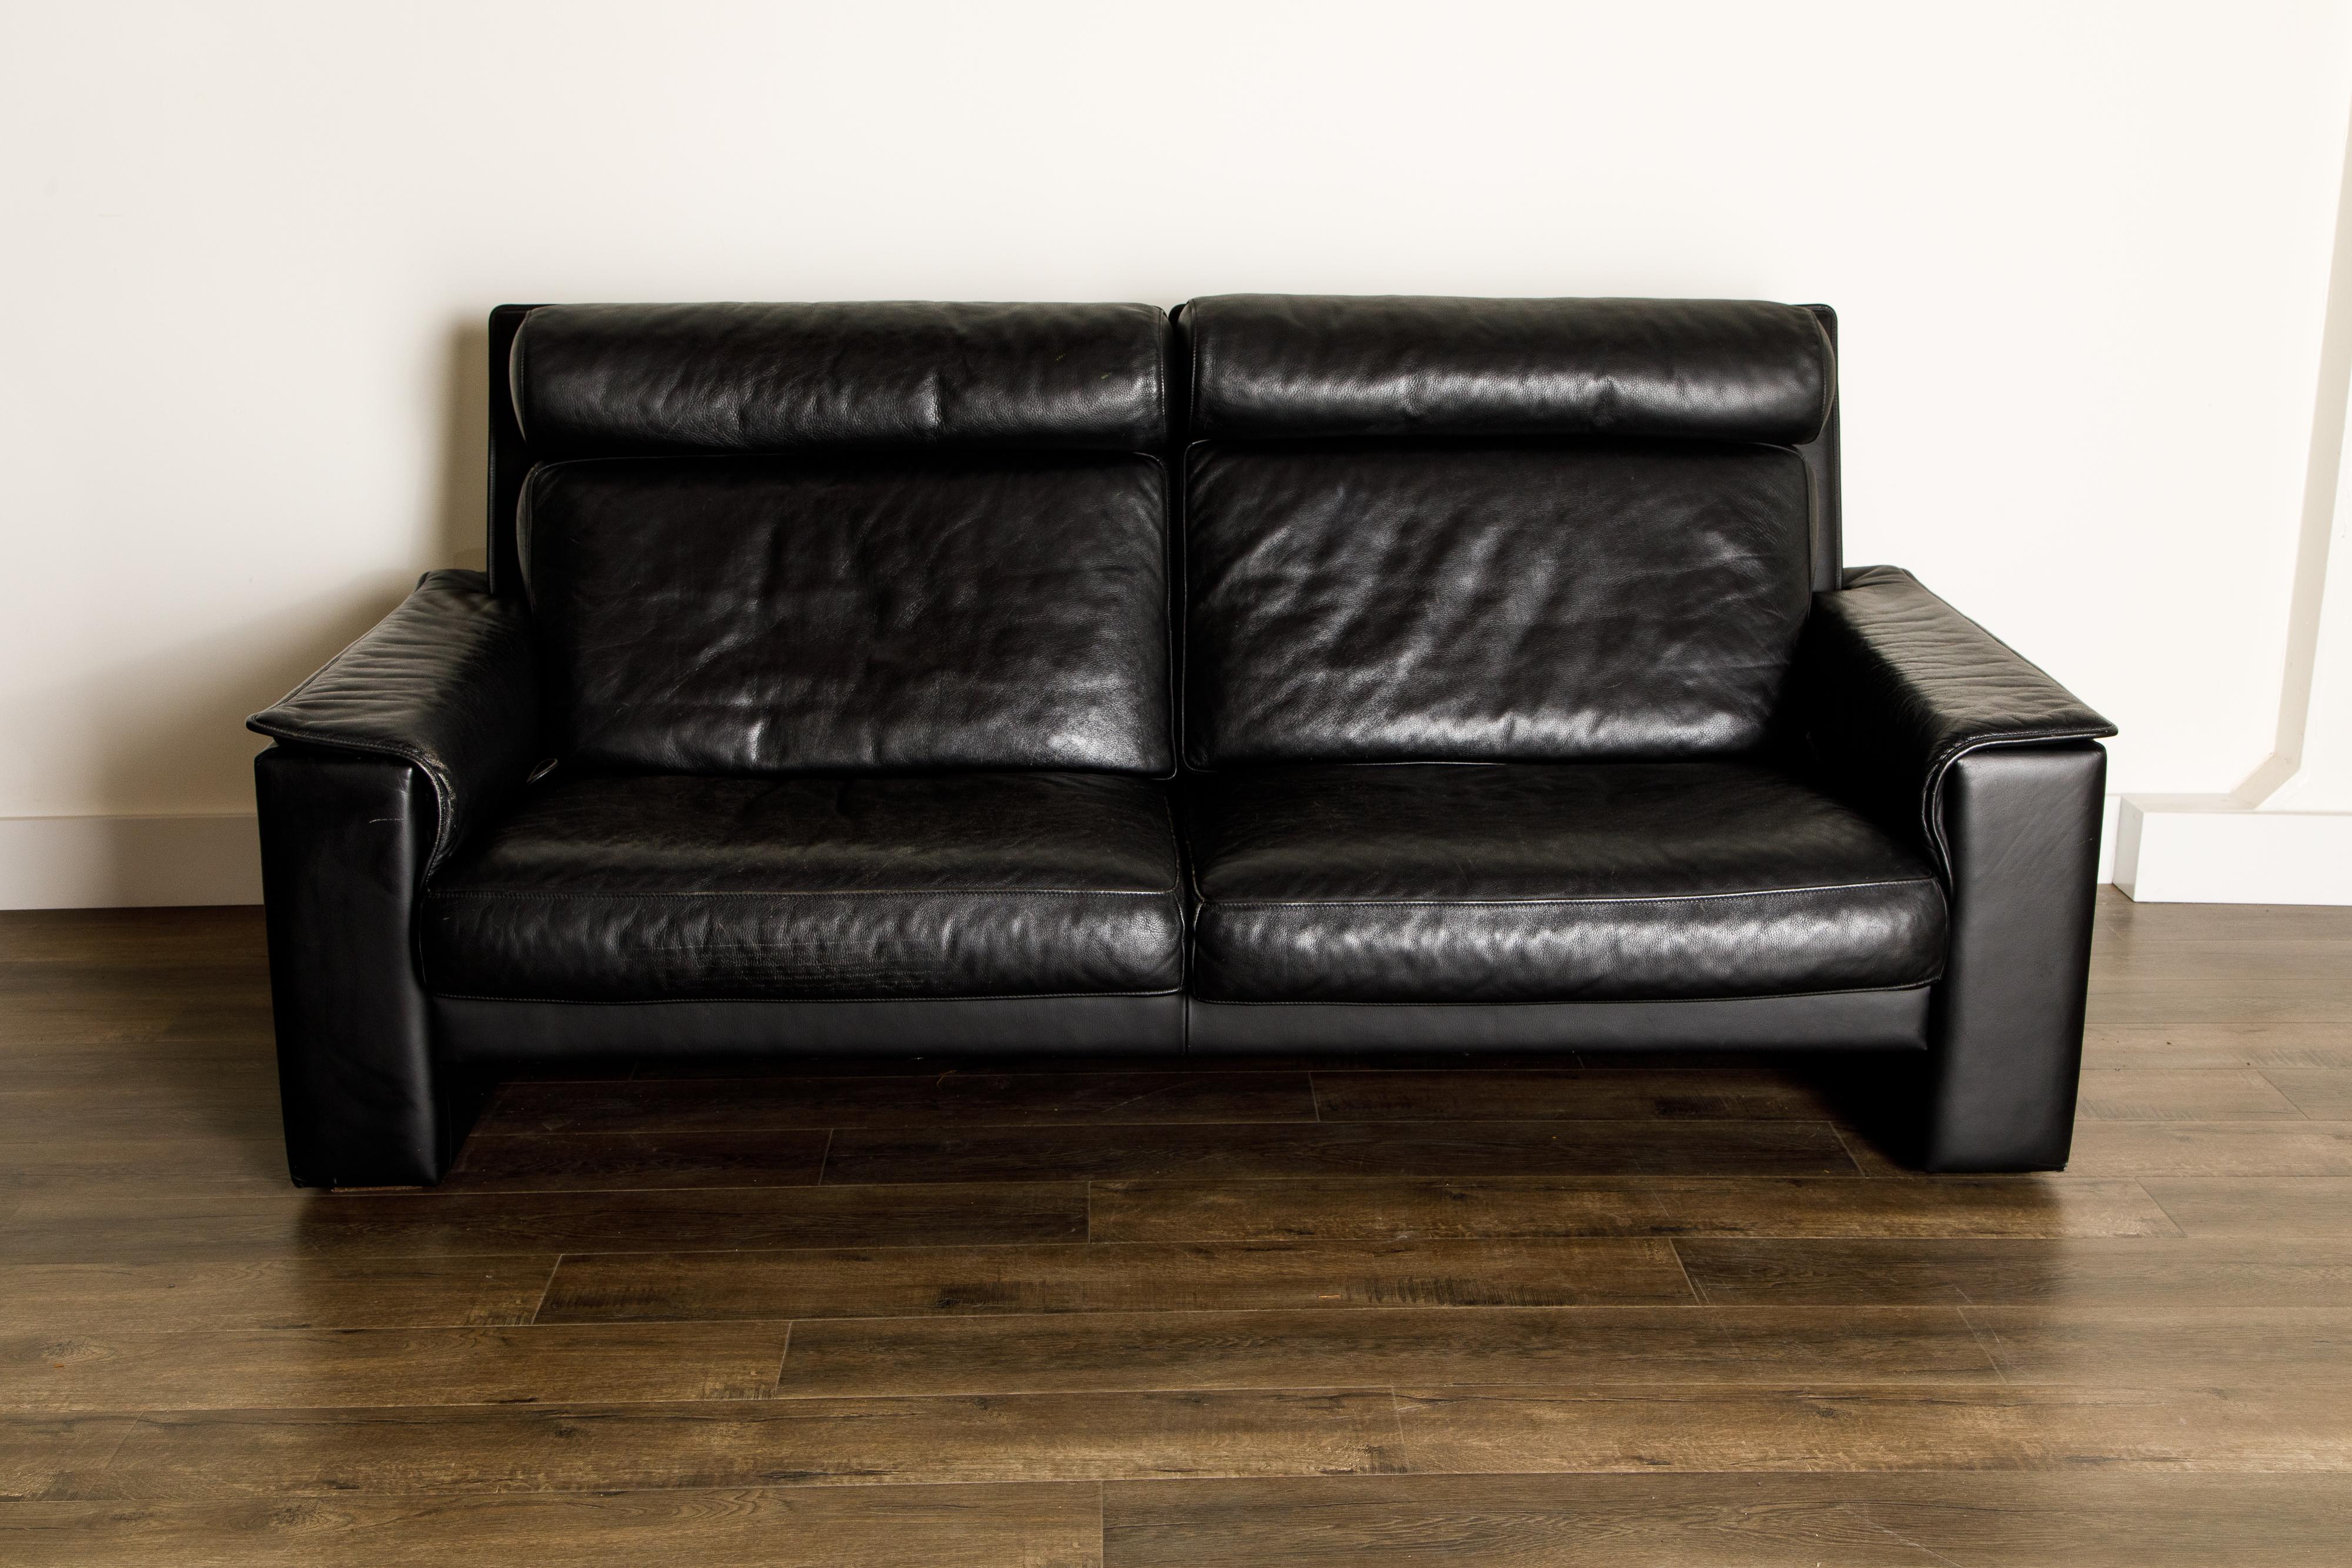 This incredible reclining sofa by De Sede, signed with original De Sede emblem on the lower side, the leading Swiss design company since the 1960s, is skillfully crafted in Switzerland from thick, heavy, quality black leather. While this is